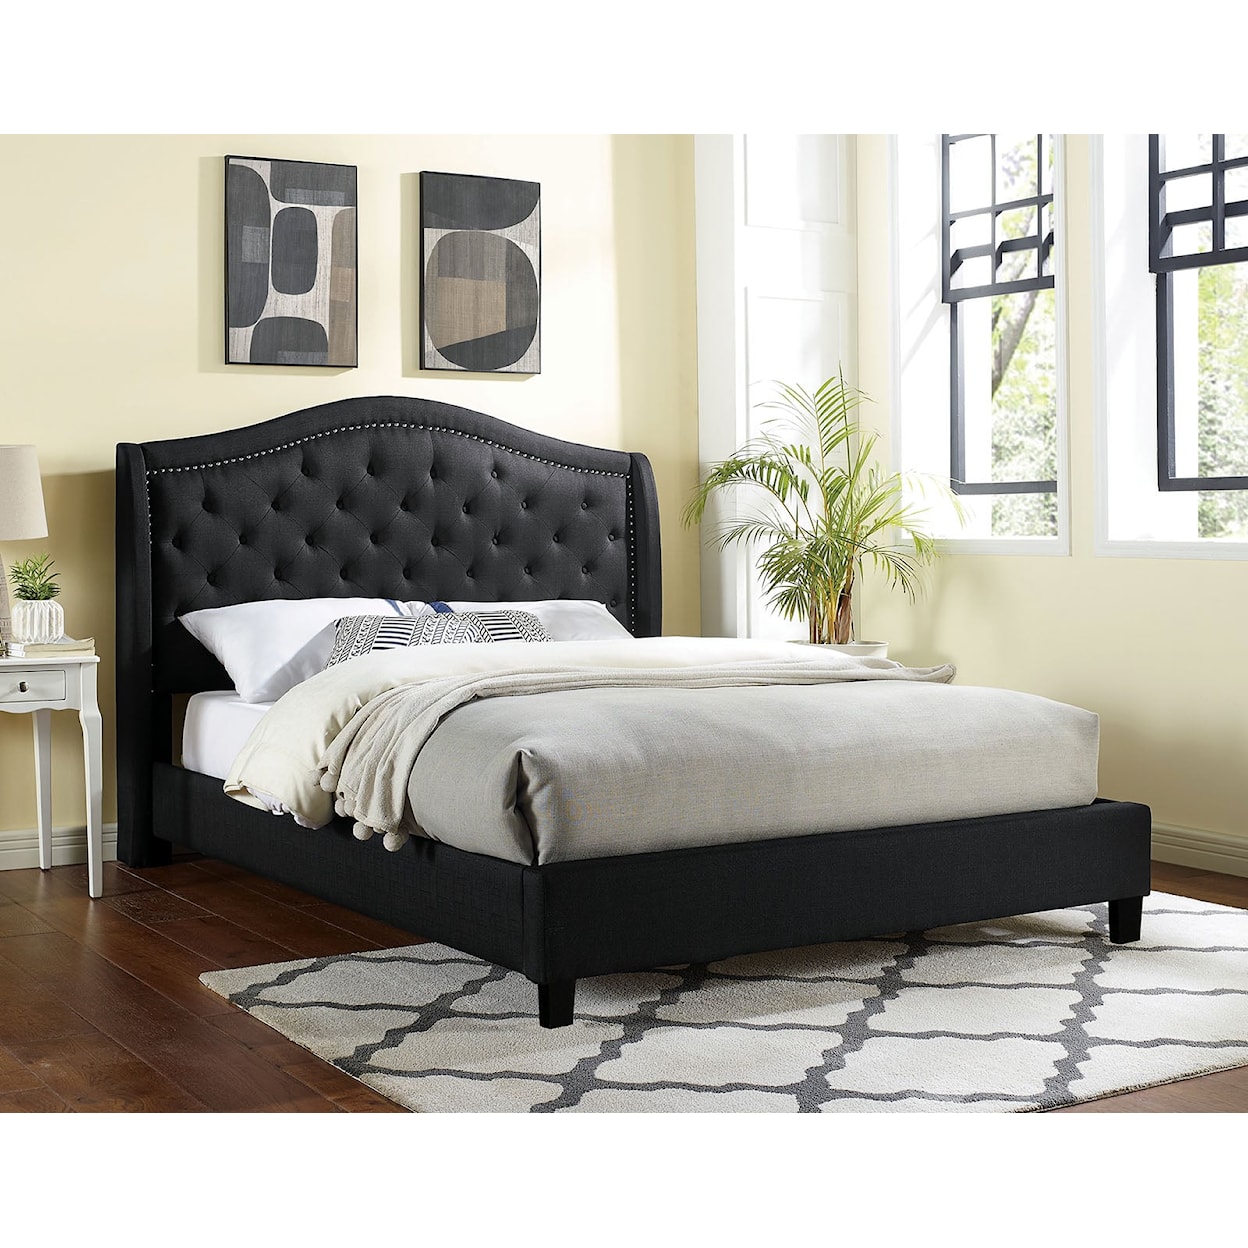 Furniture of America Carly Queen Bed, Black